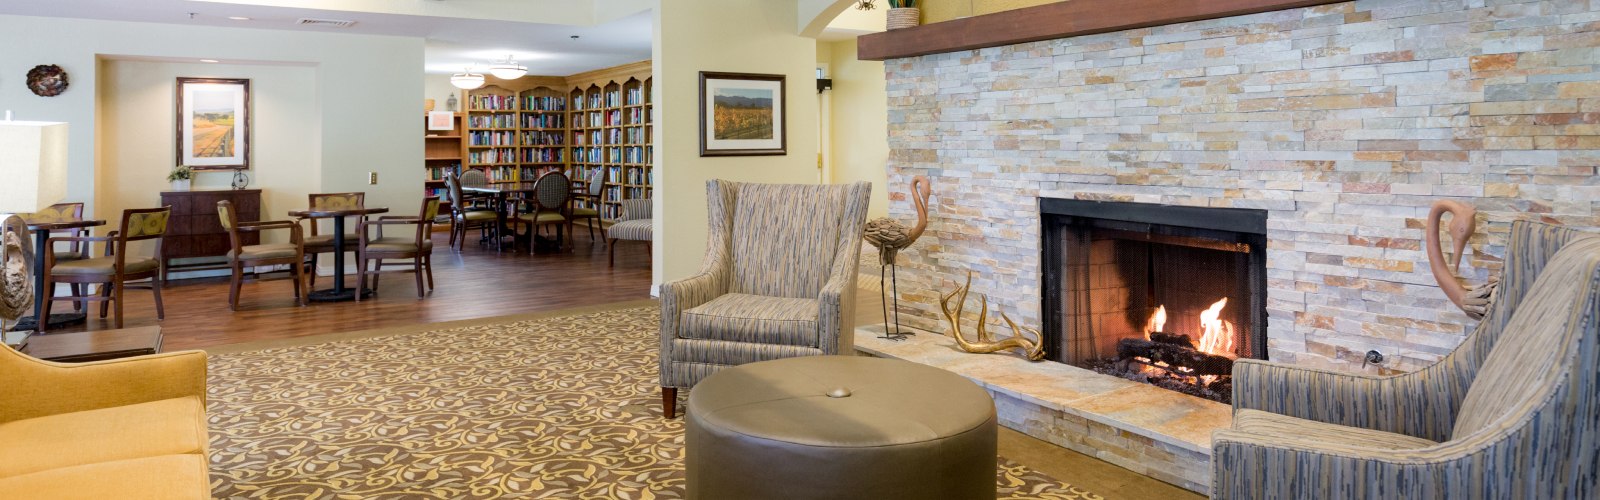 Assisted living Rohnert Park, lobby with a large stone fireplace